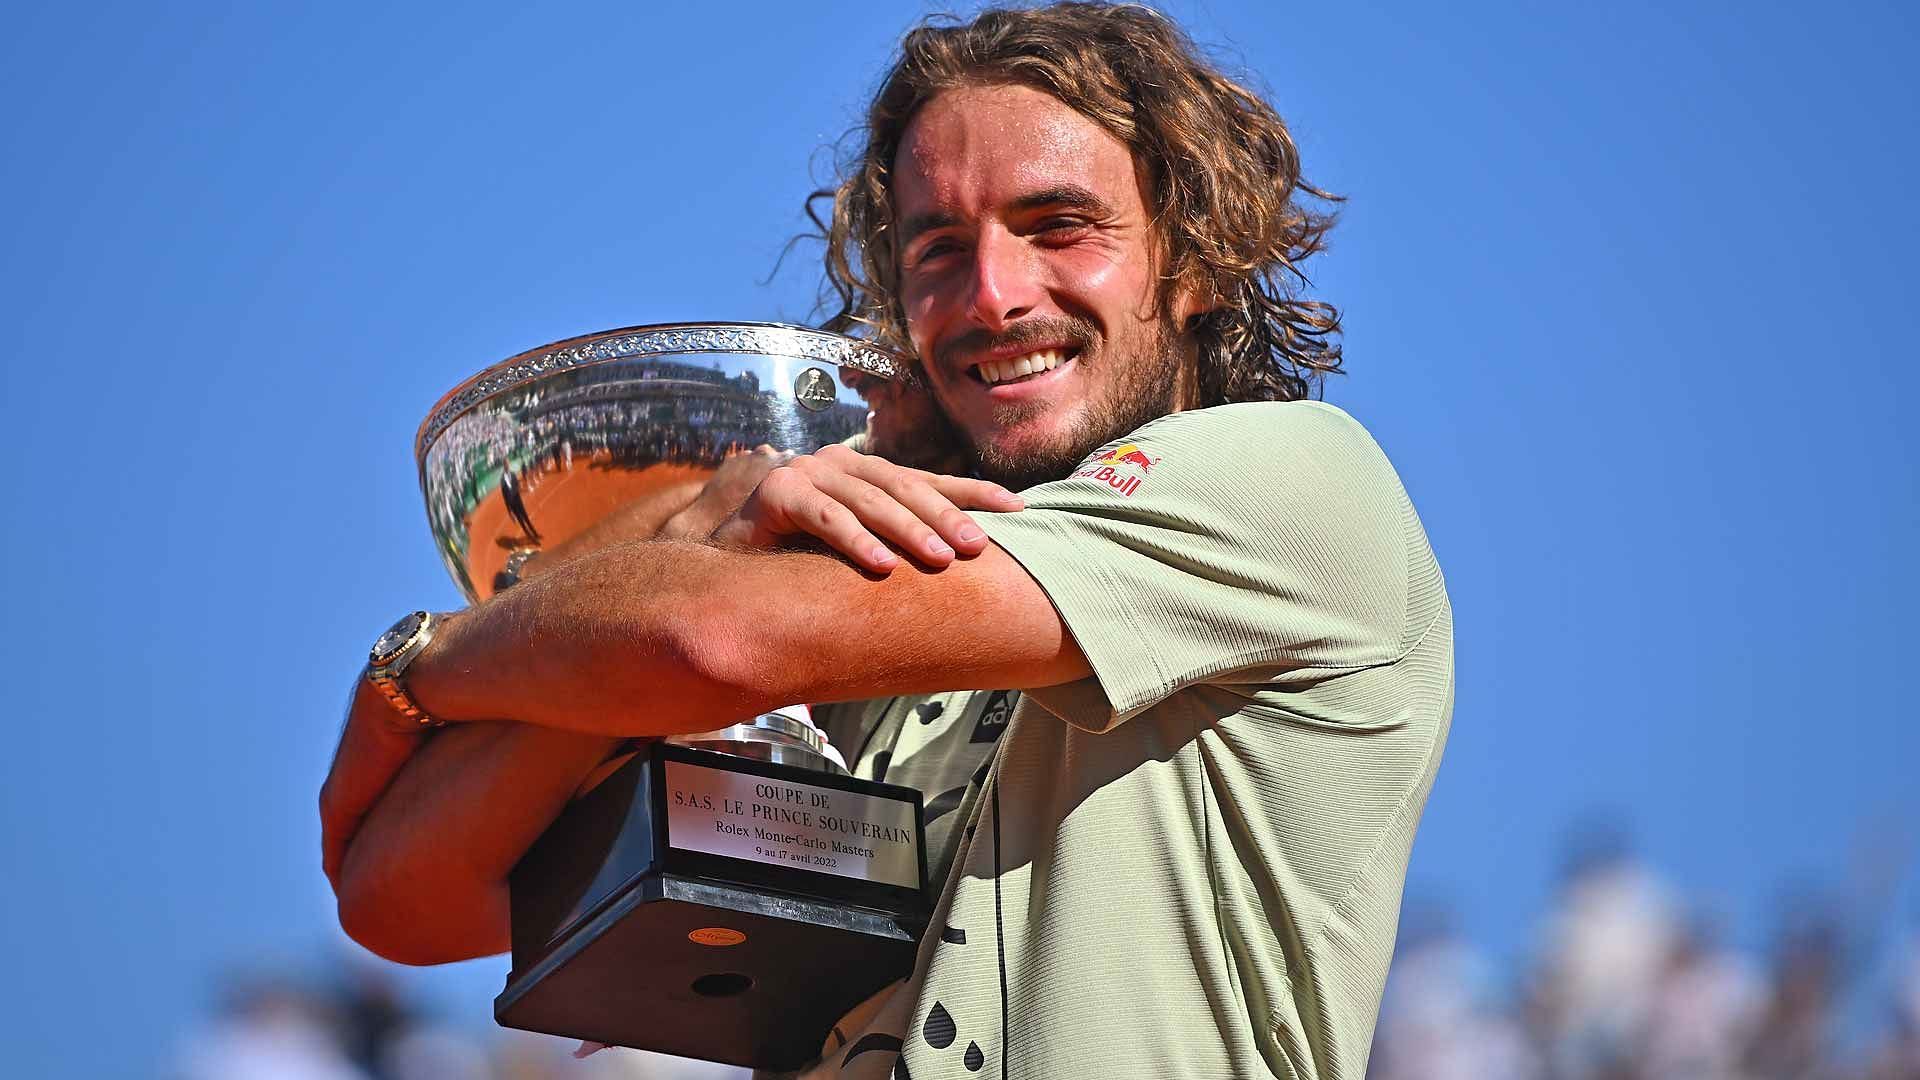 Monte-Carlo Masters 2022: 3 things that stood out in Stefanos Tsitsipas' title win